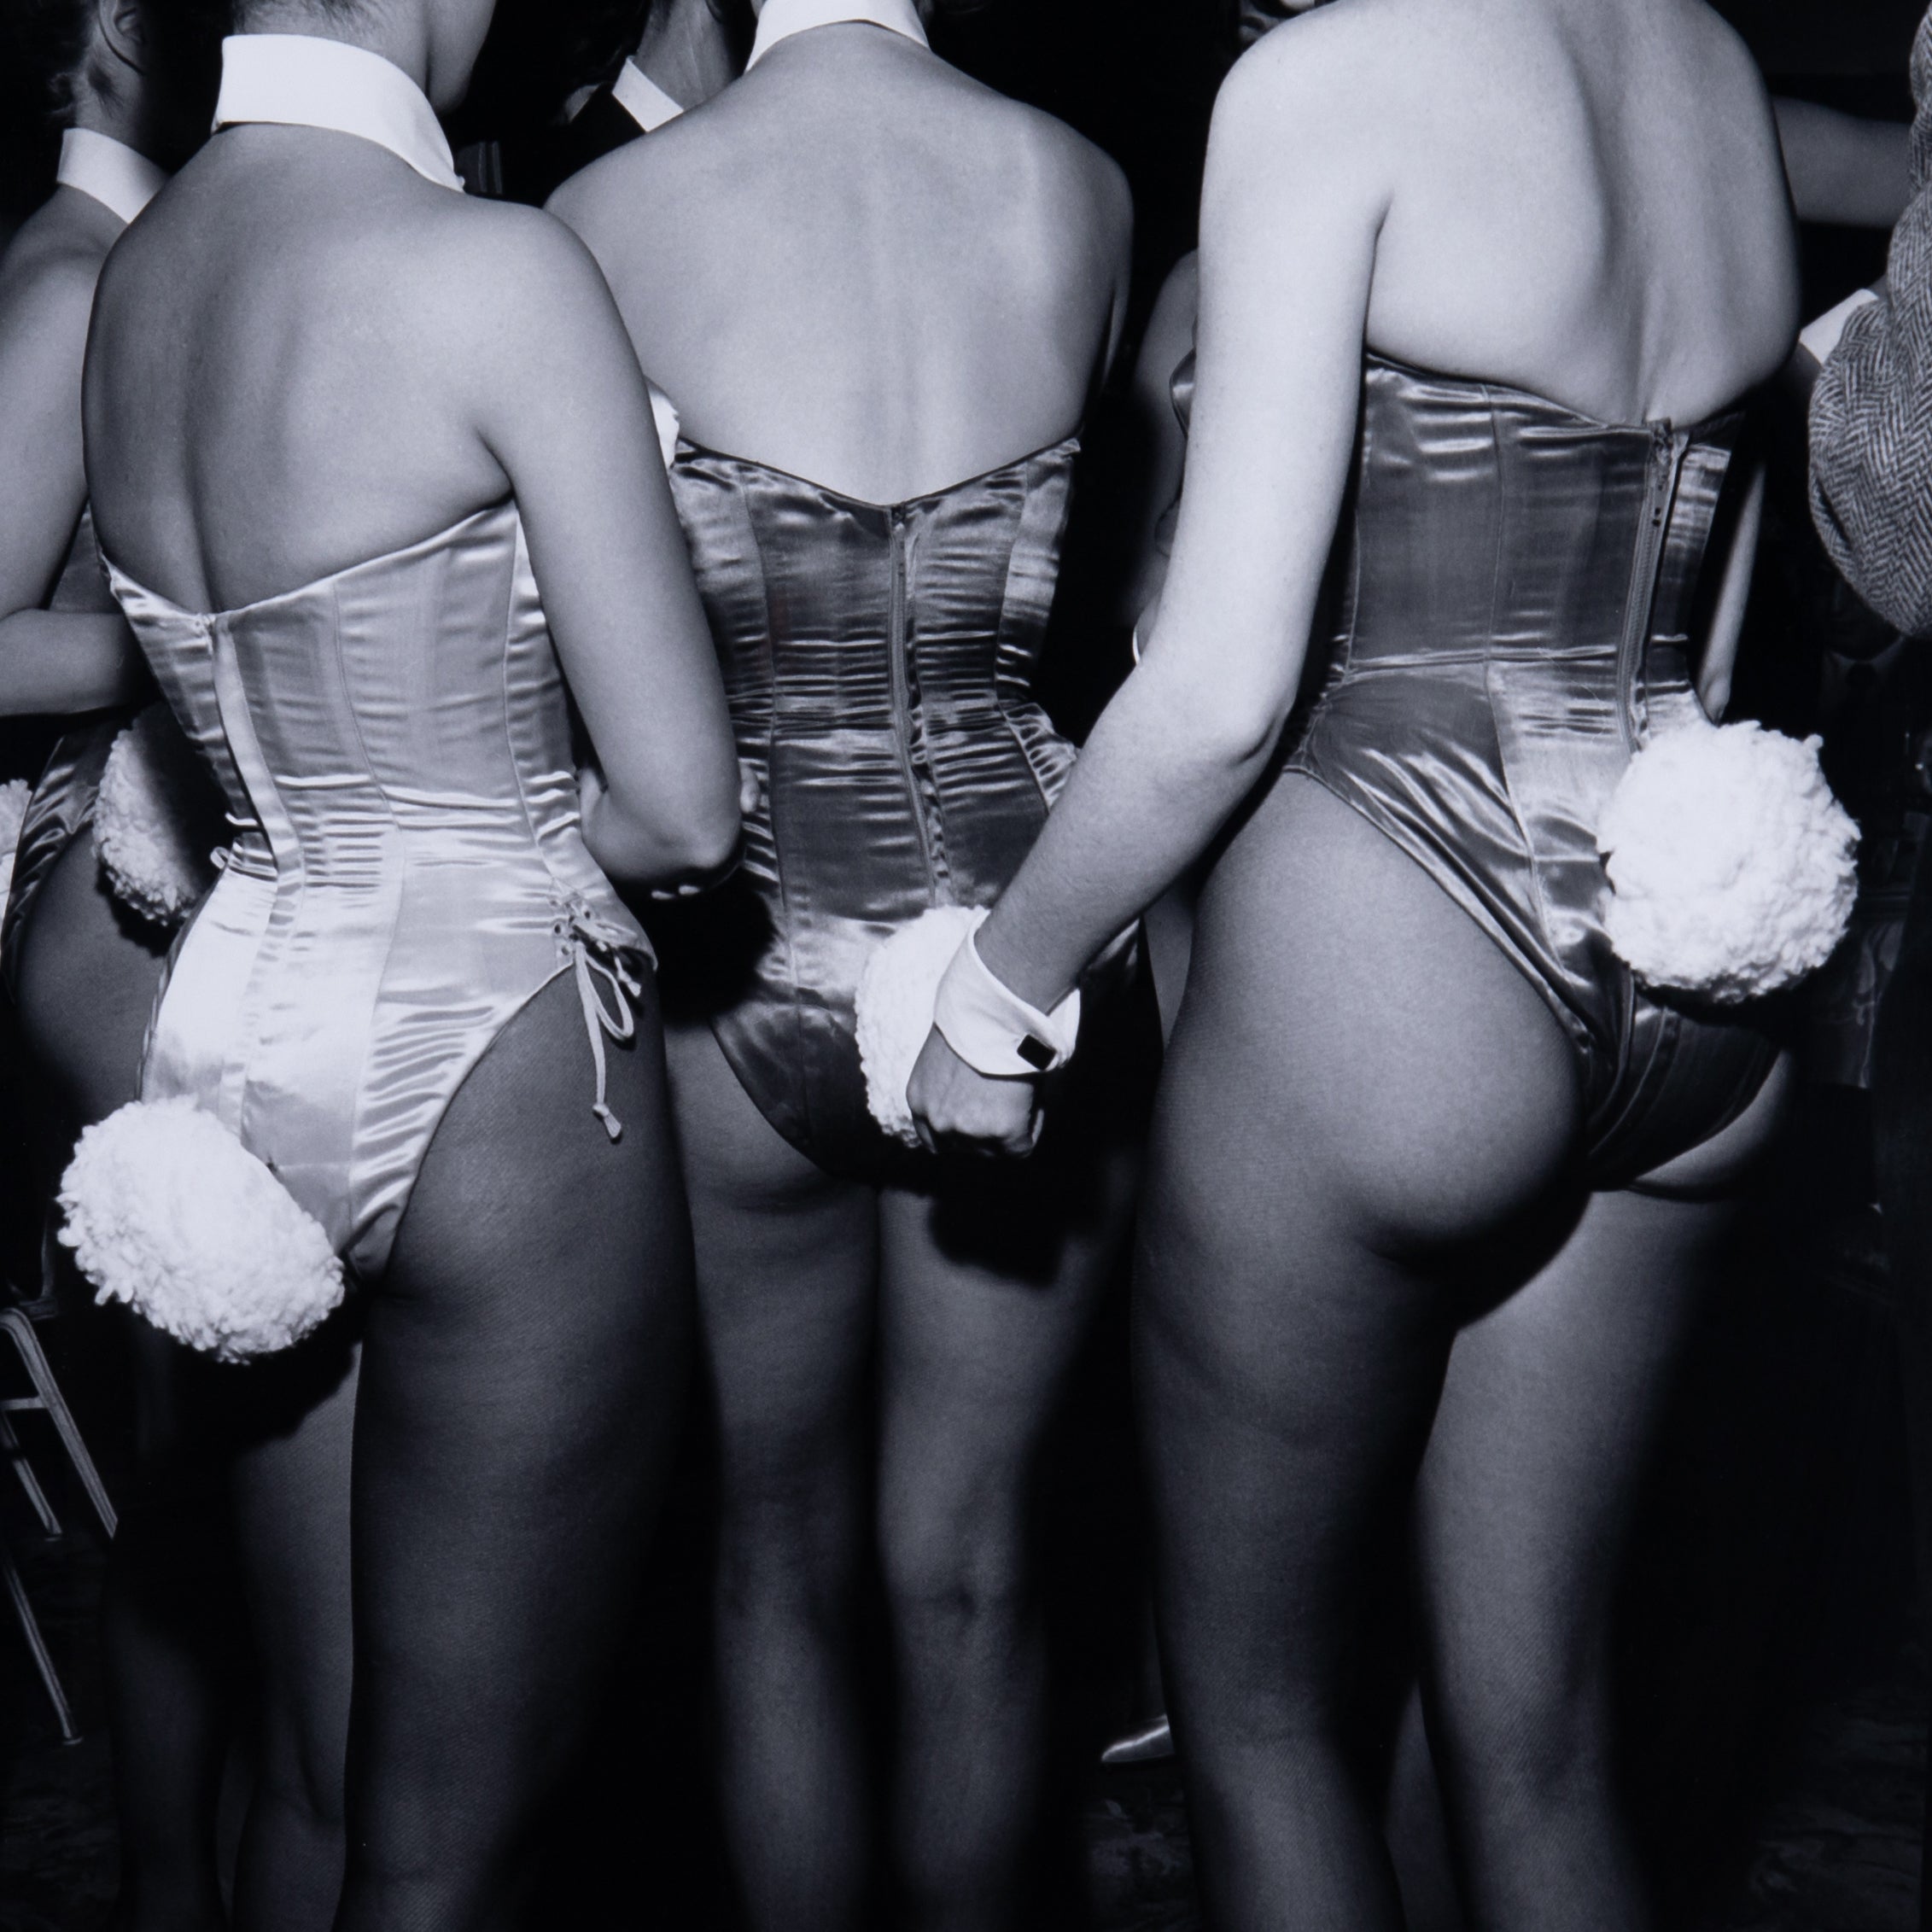 Playboy Club Party In NY By Getty Images